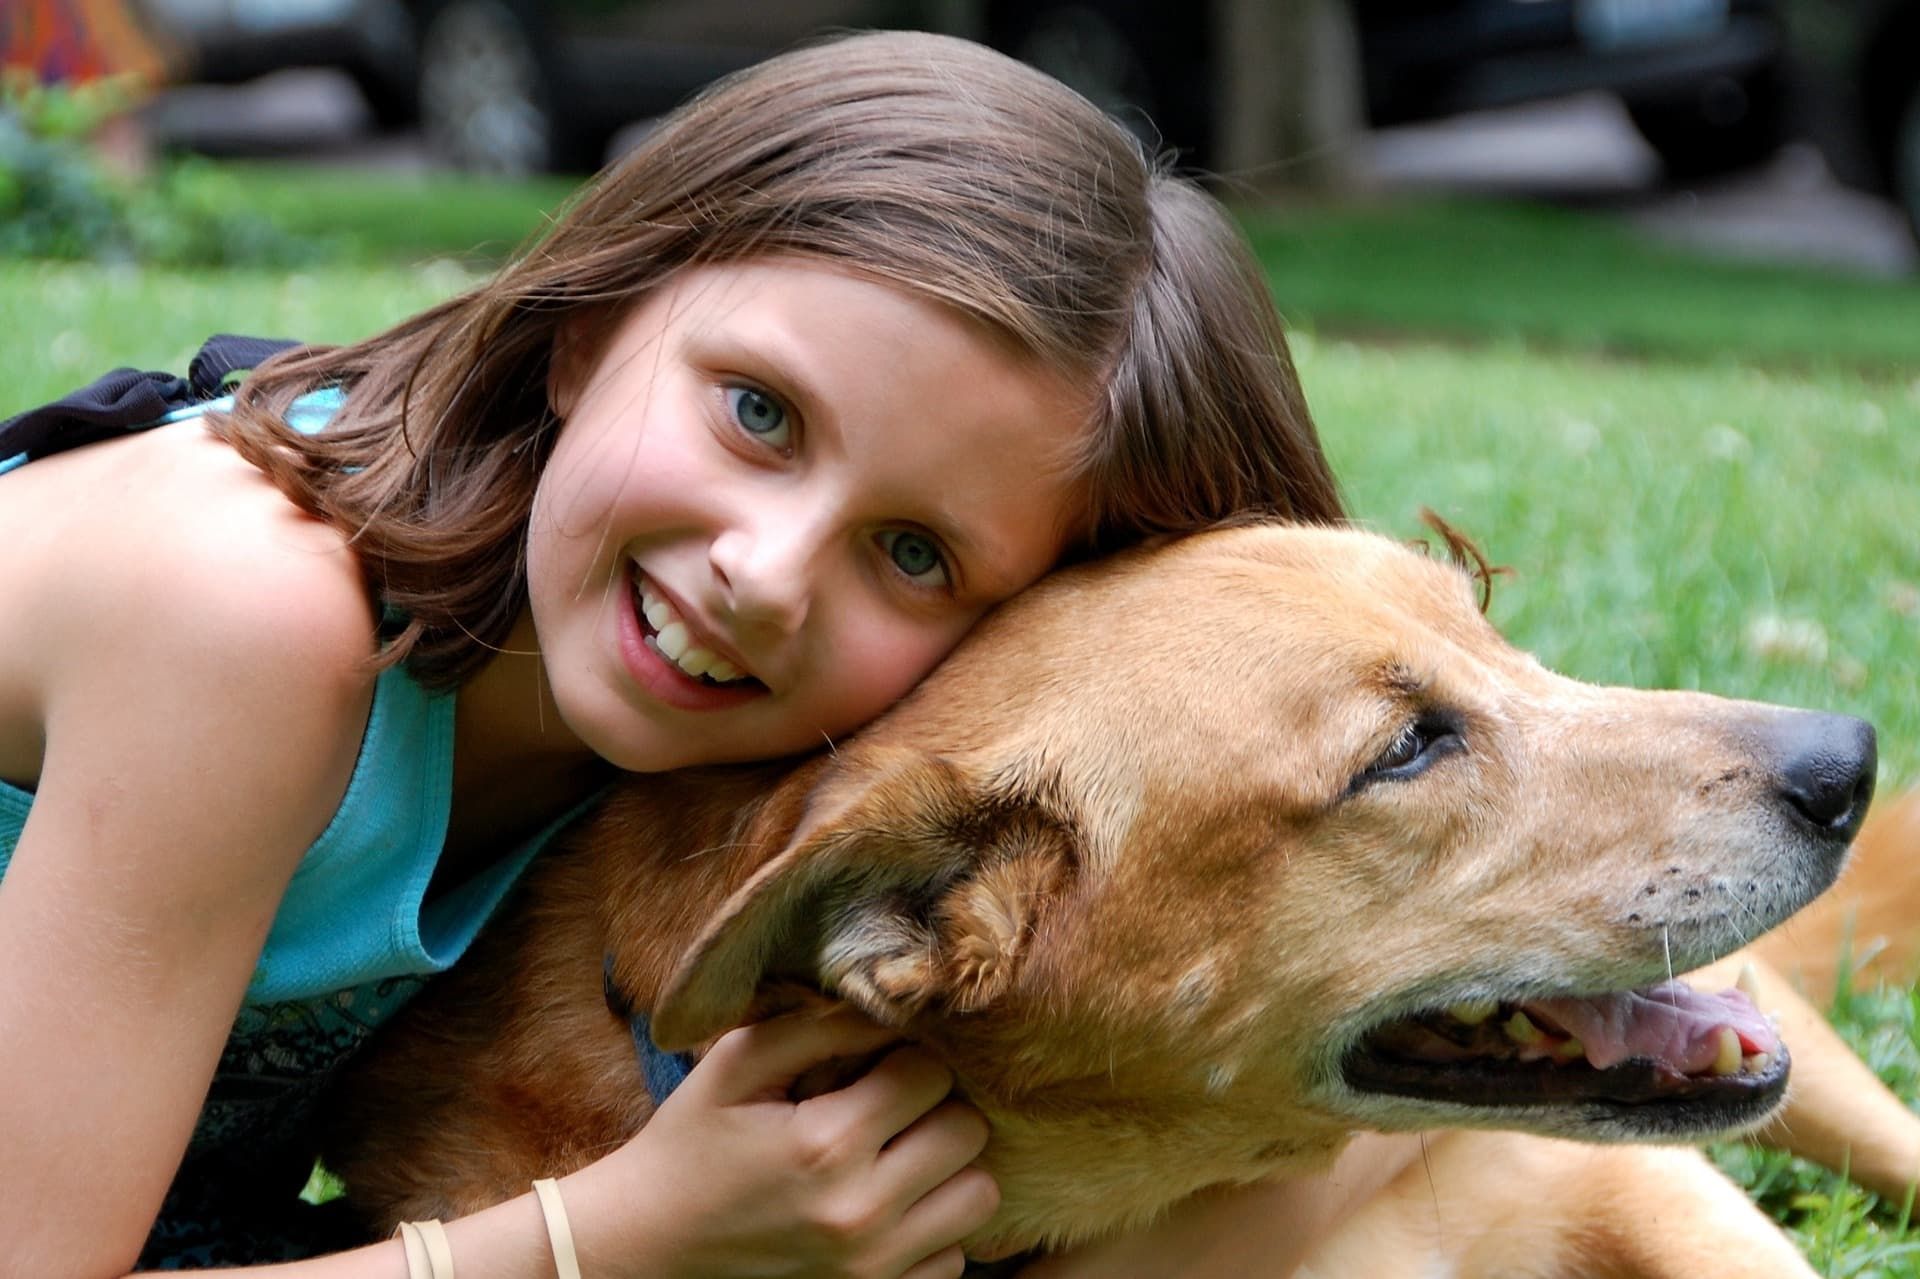 Young girl with head resting on a golden colored adult dog.